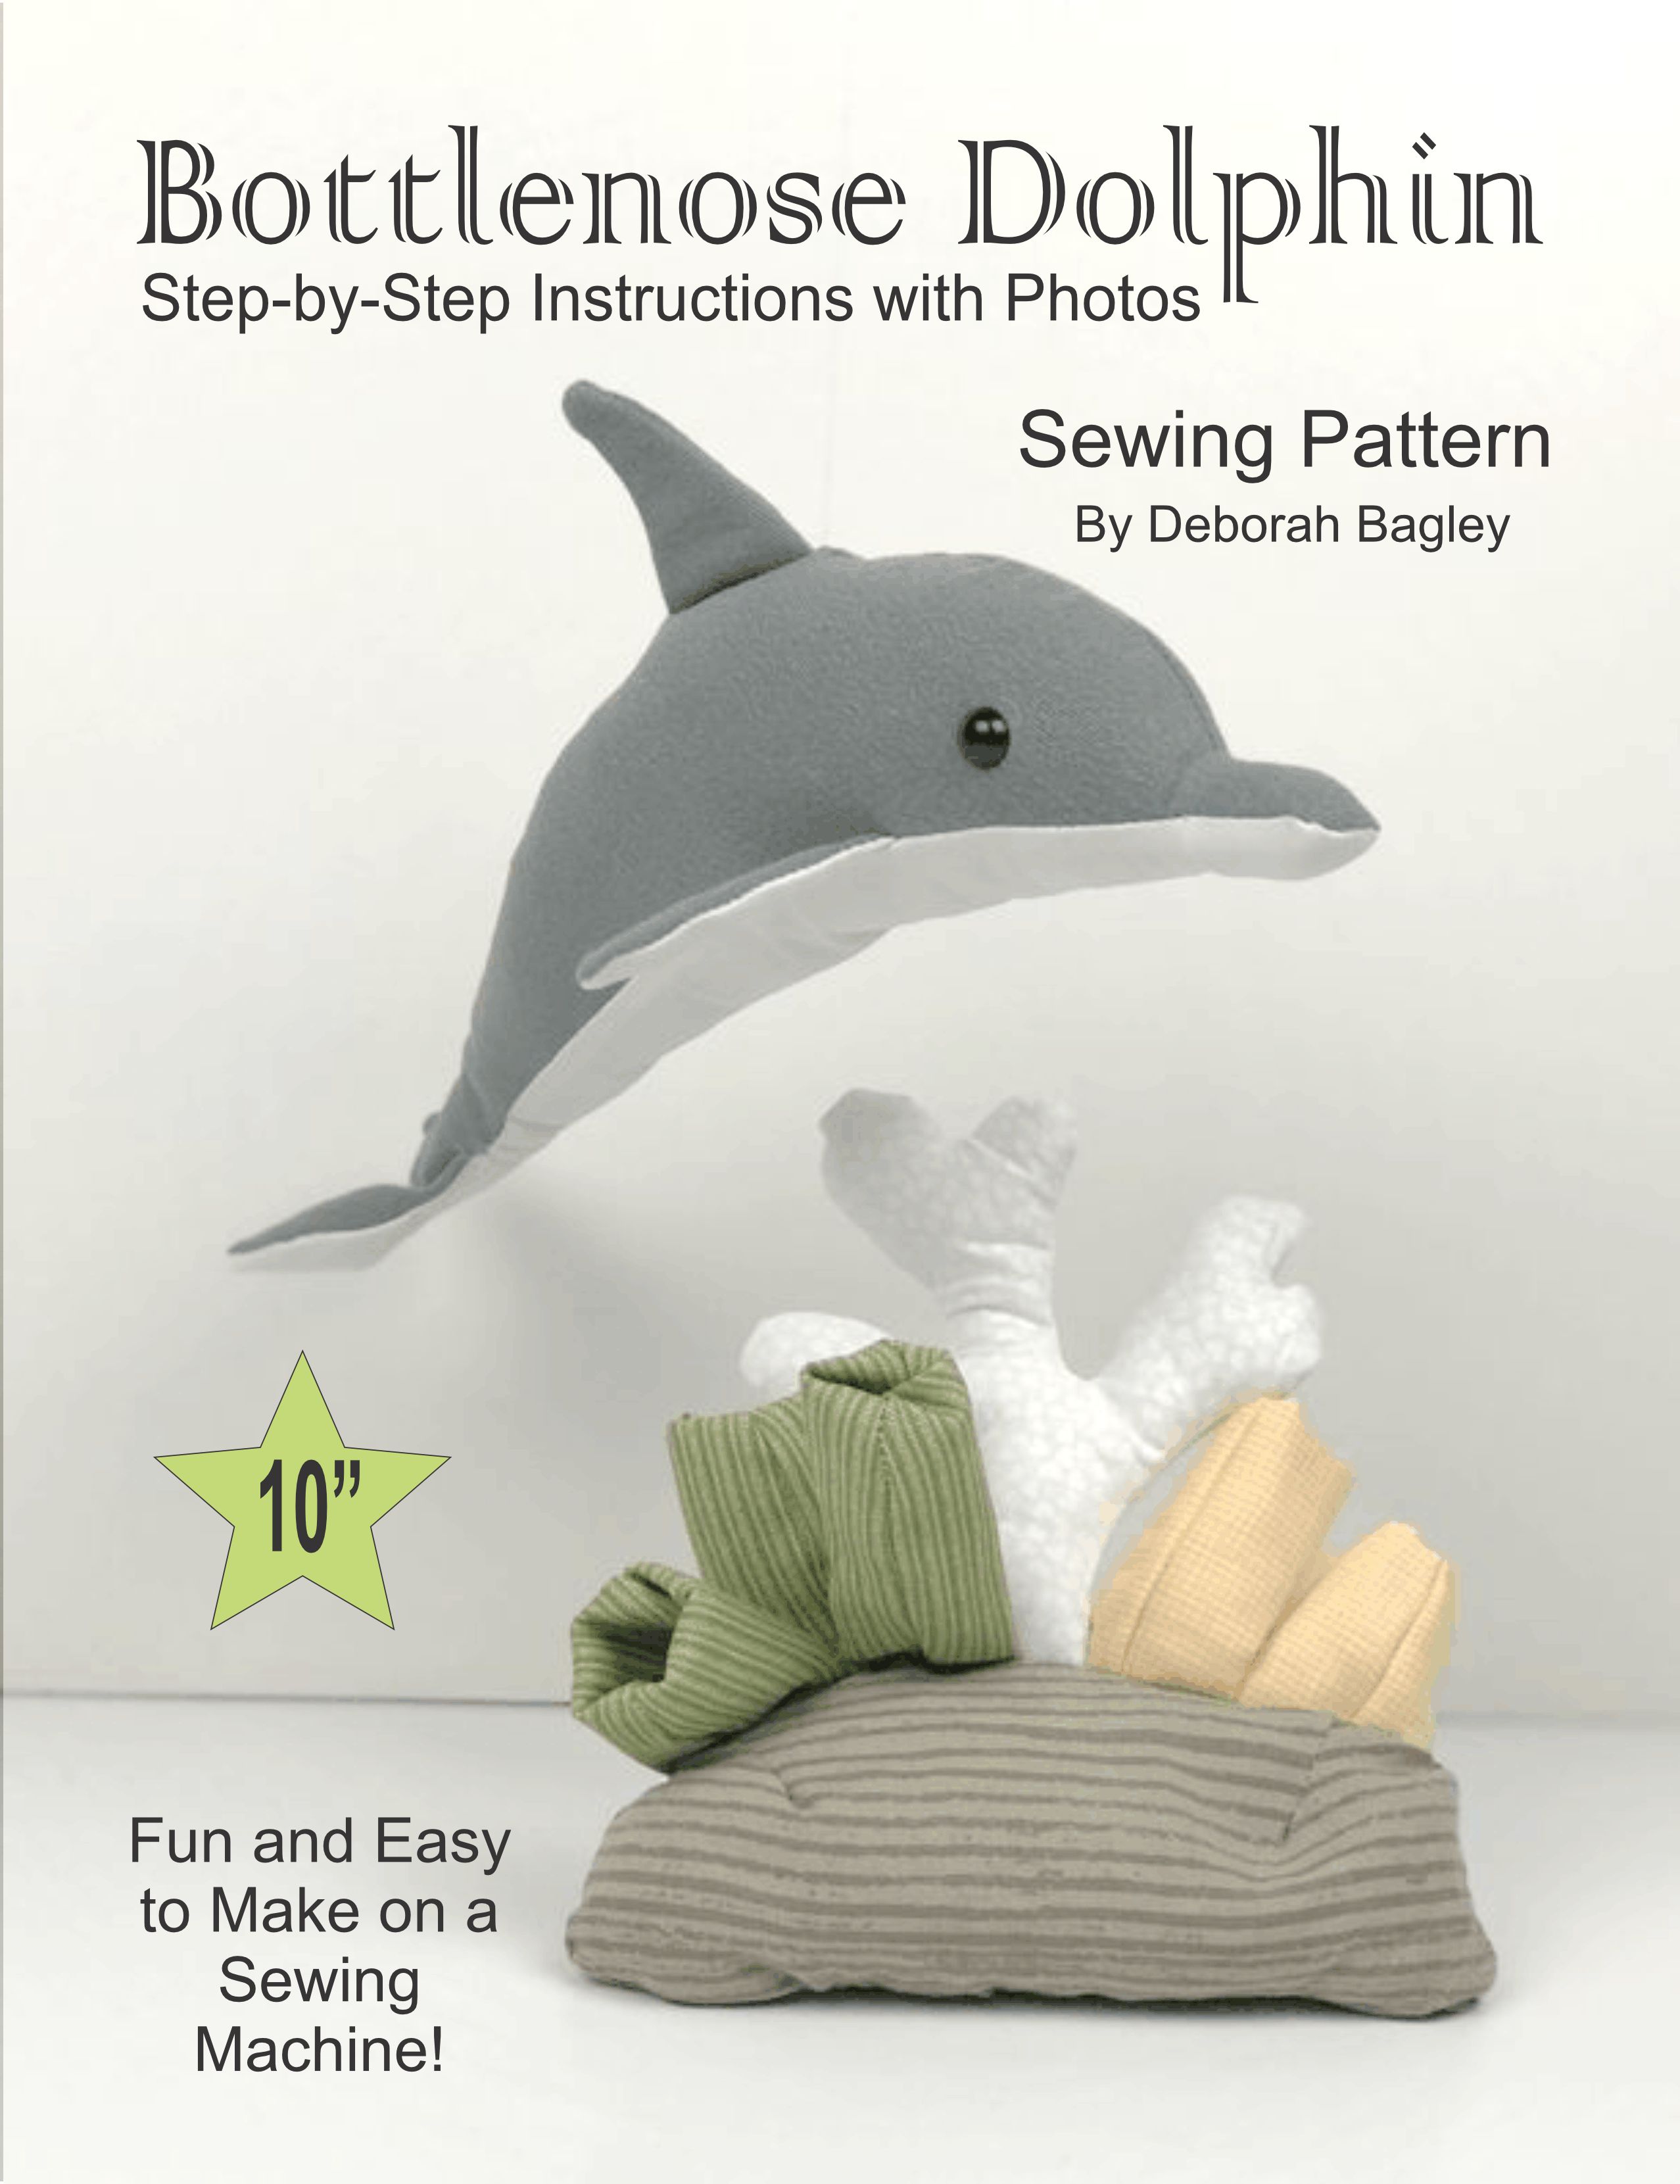 bottle nose dolphin sewing pattern